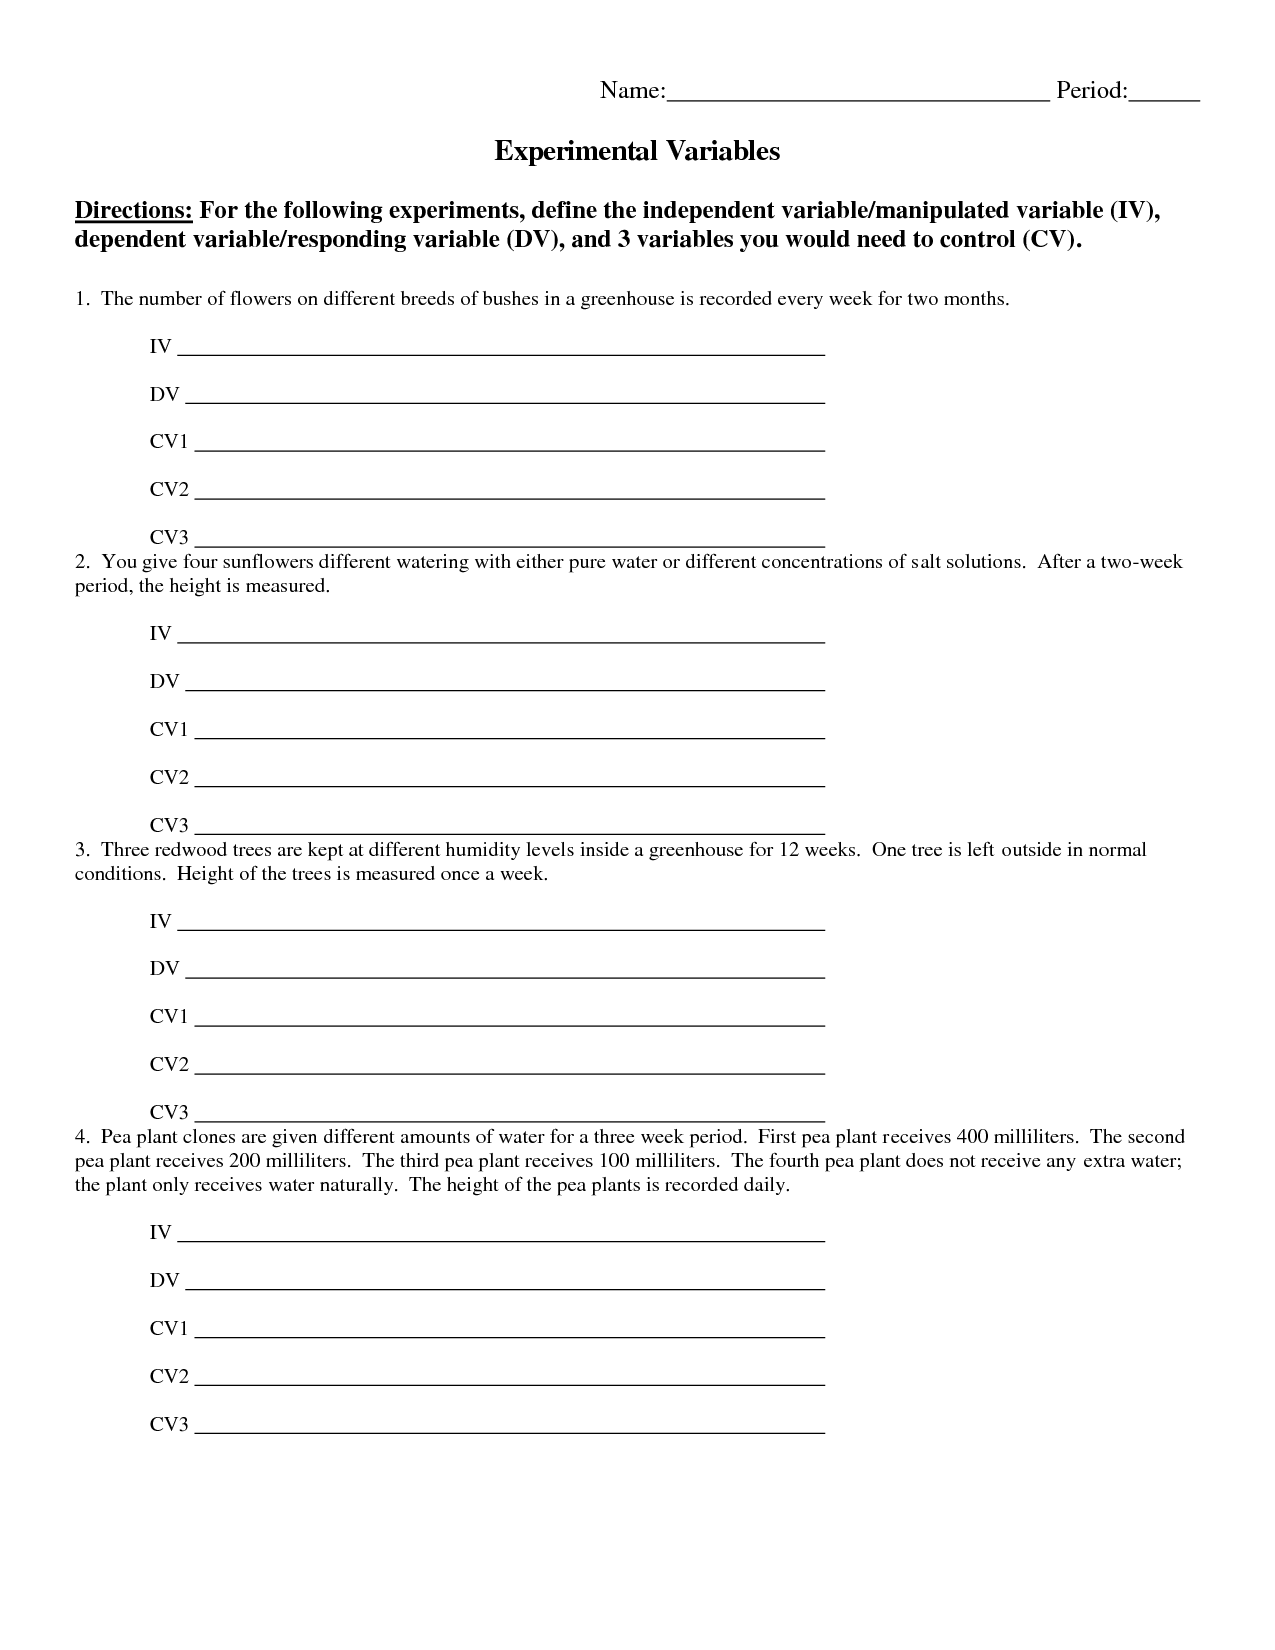 15 Best Images of Simpsons Variable Worksheet Answer Key - Writing